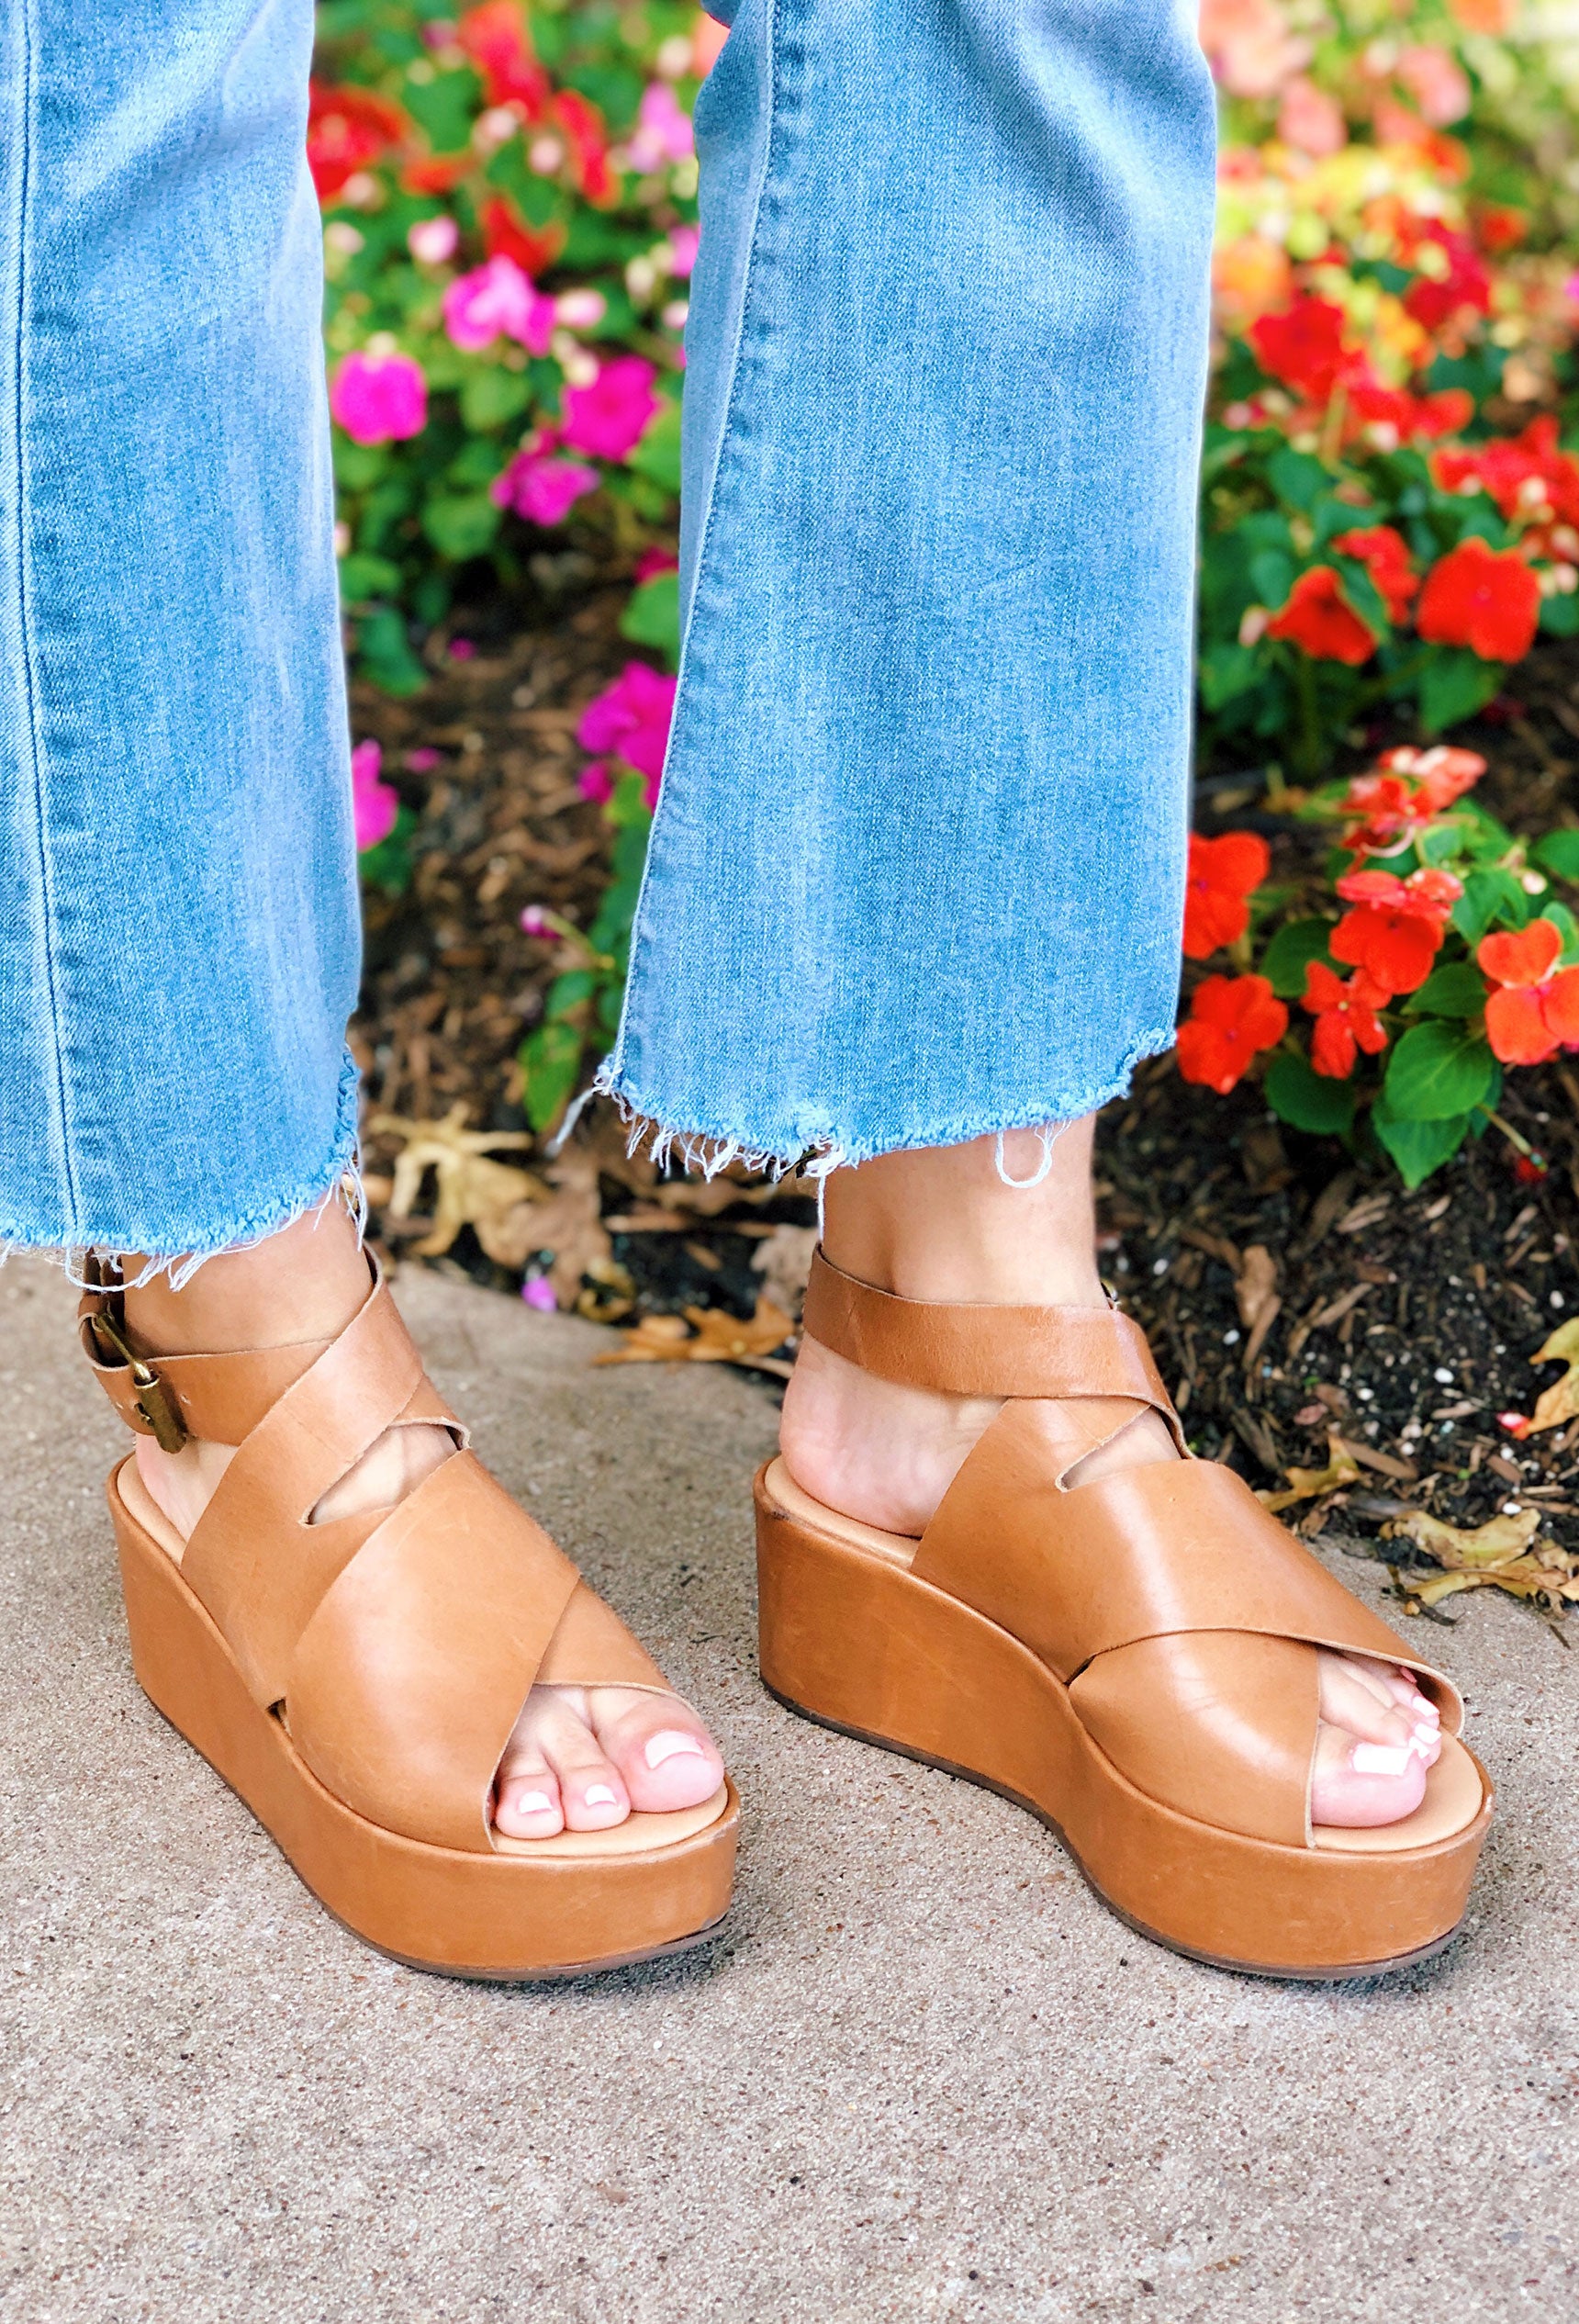 Runaway Platform Sandals in Tan, leather platform shoes with ankle buckle